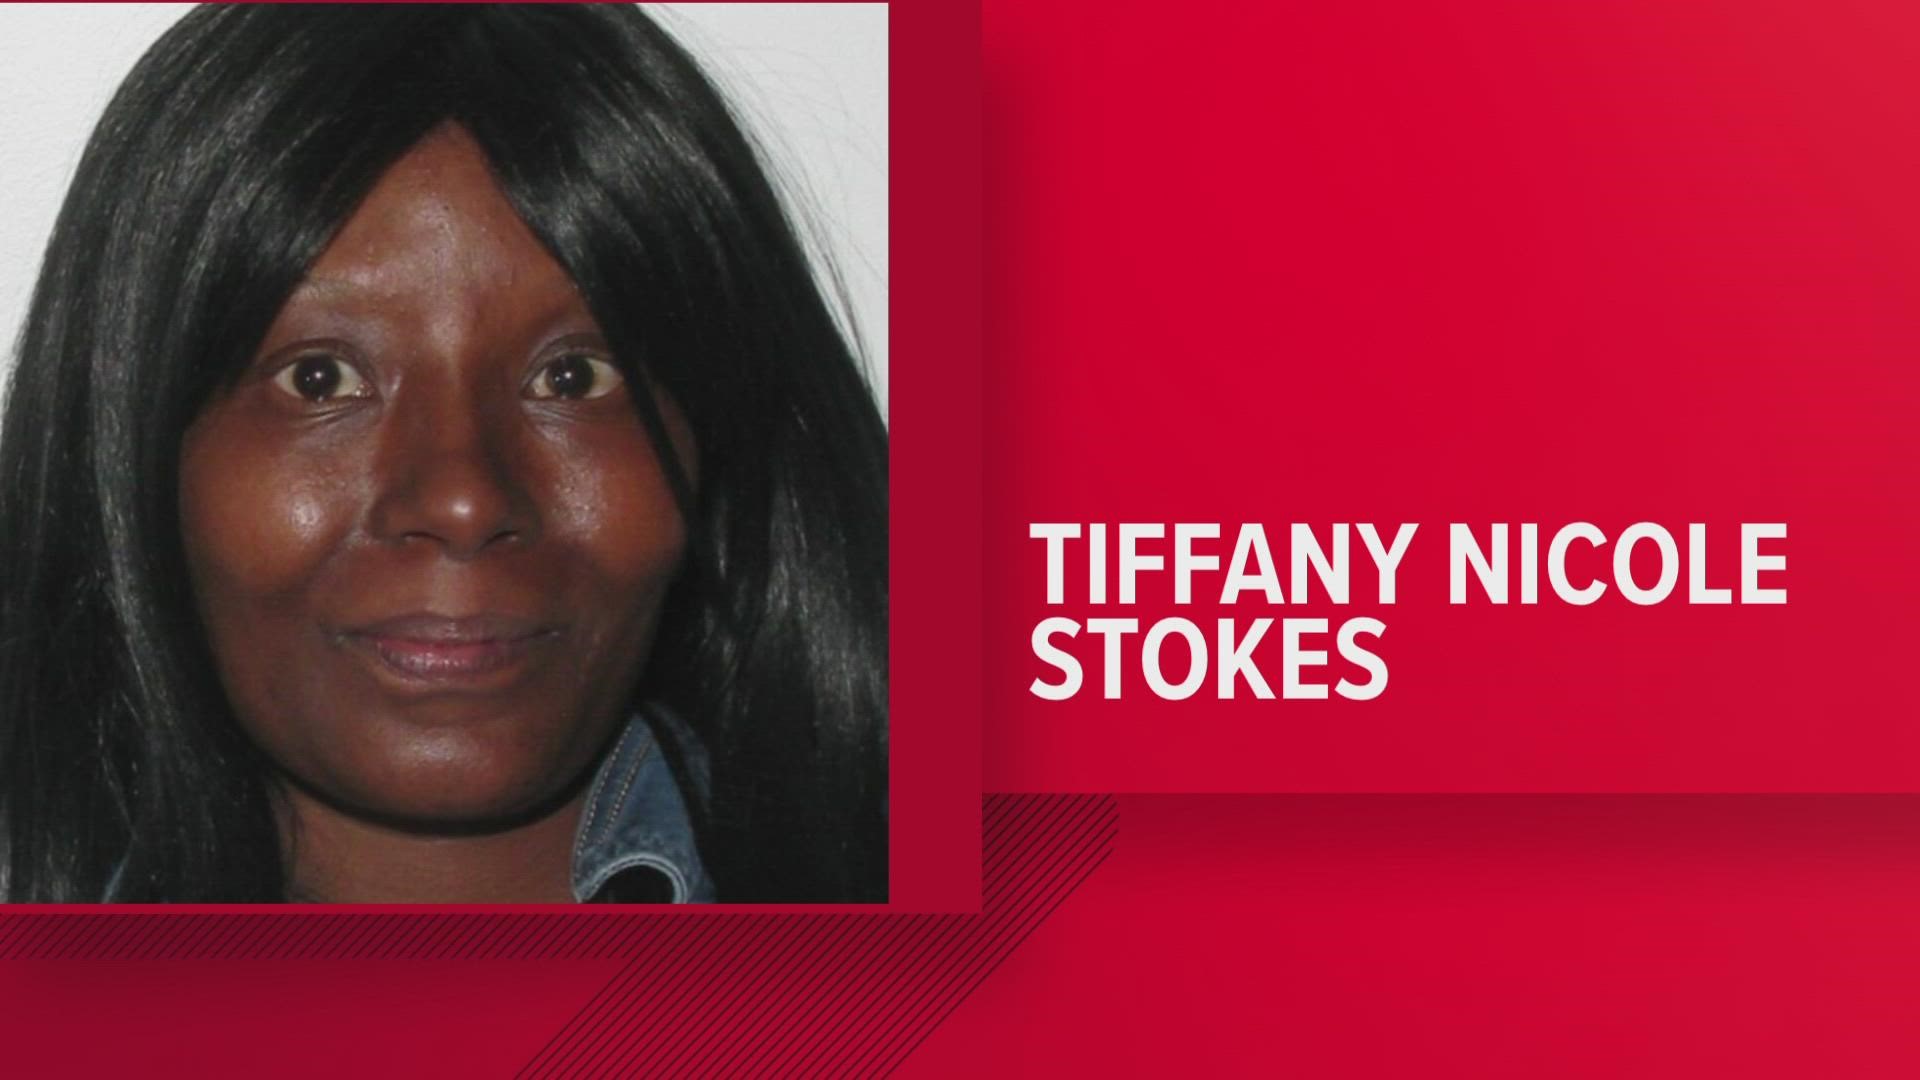 Police are searching for a woman wanted in connection to the overdose death of a child in Virginia back in June.